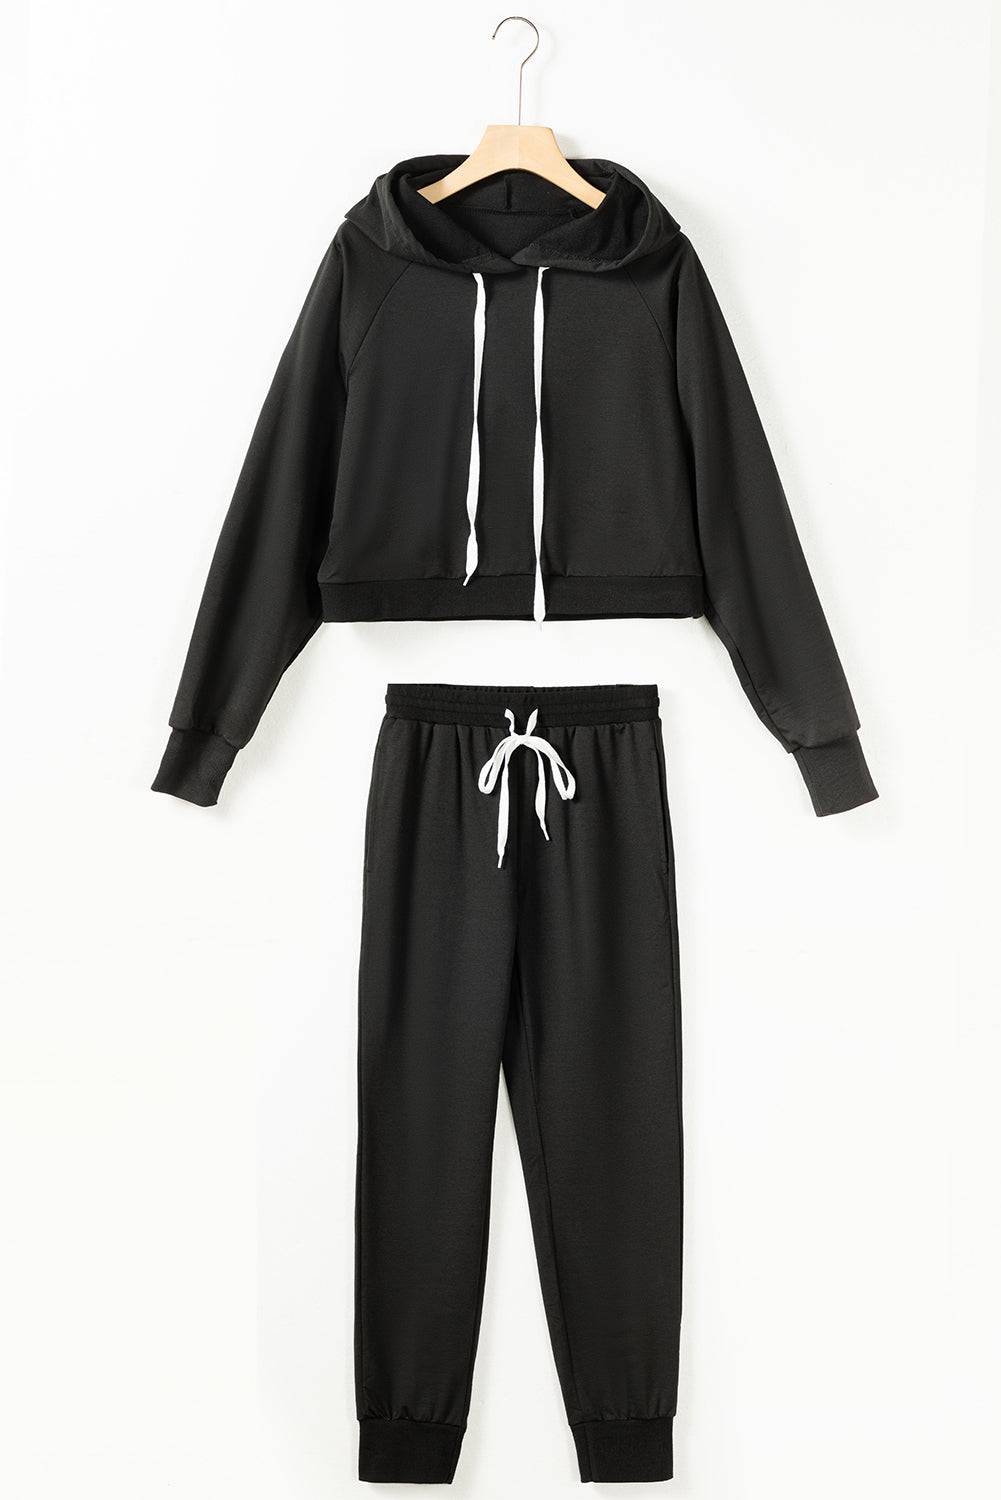 a black sweatshirt and sweatpants with white drawstrings